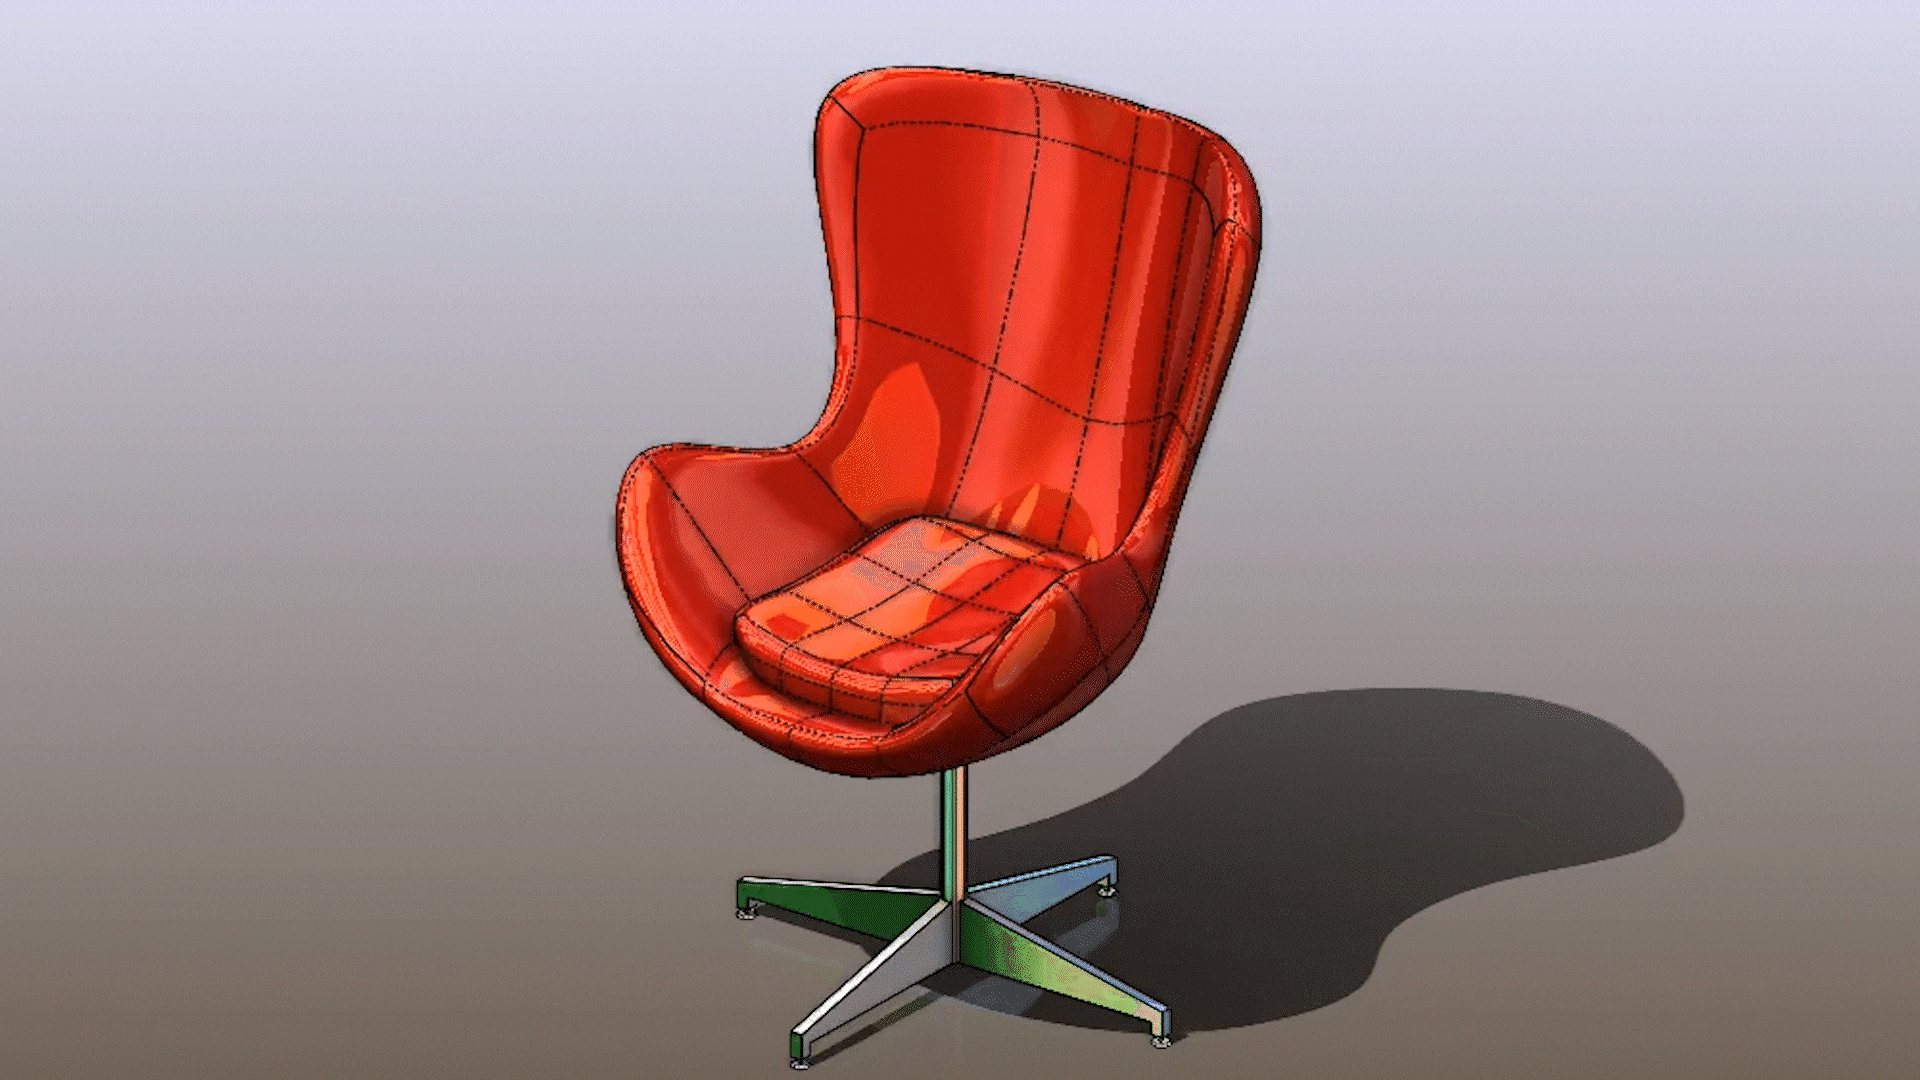 Rotating a chair built in SOLIDWORKS xShape